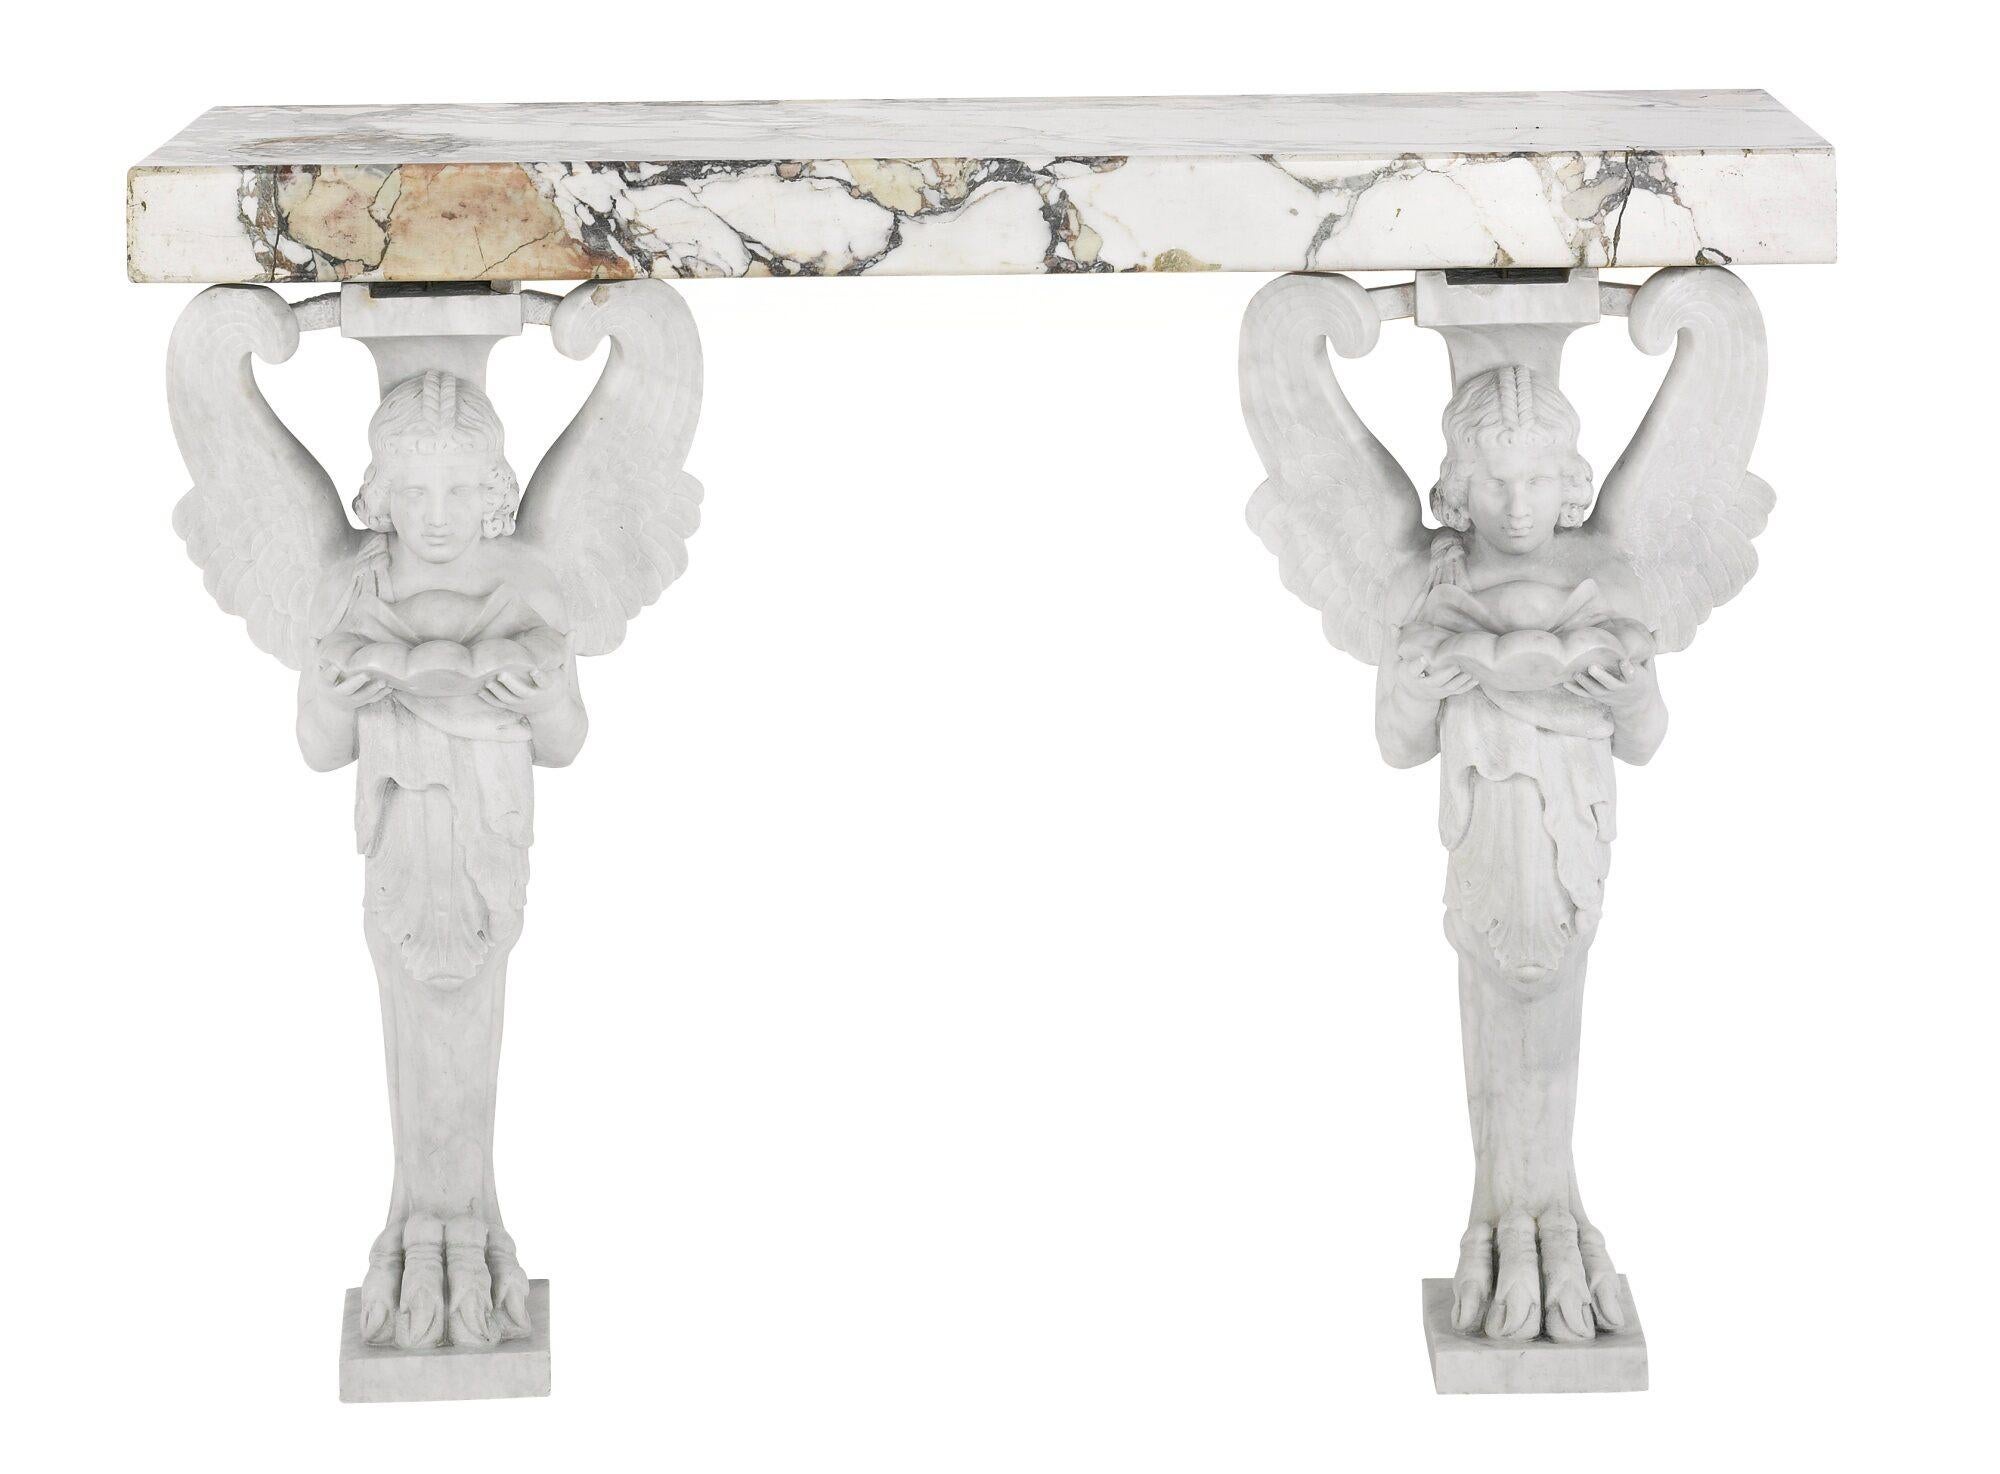 Pair of 20th century carved marble and breche violettte marble topped console tables. Each with a winged figure holding a votive shell. Wall mounted

Provenance: Sotheby's Private Collections Sale, April 2015.